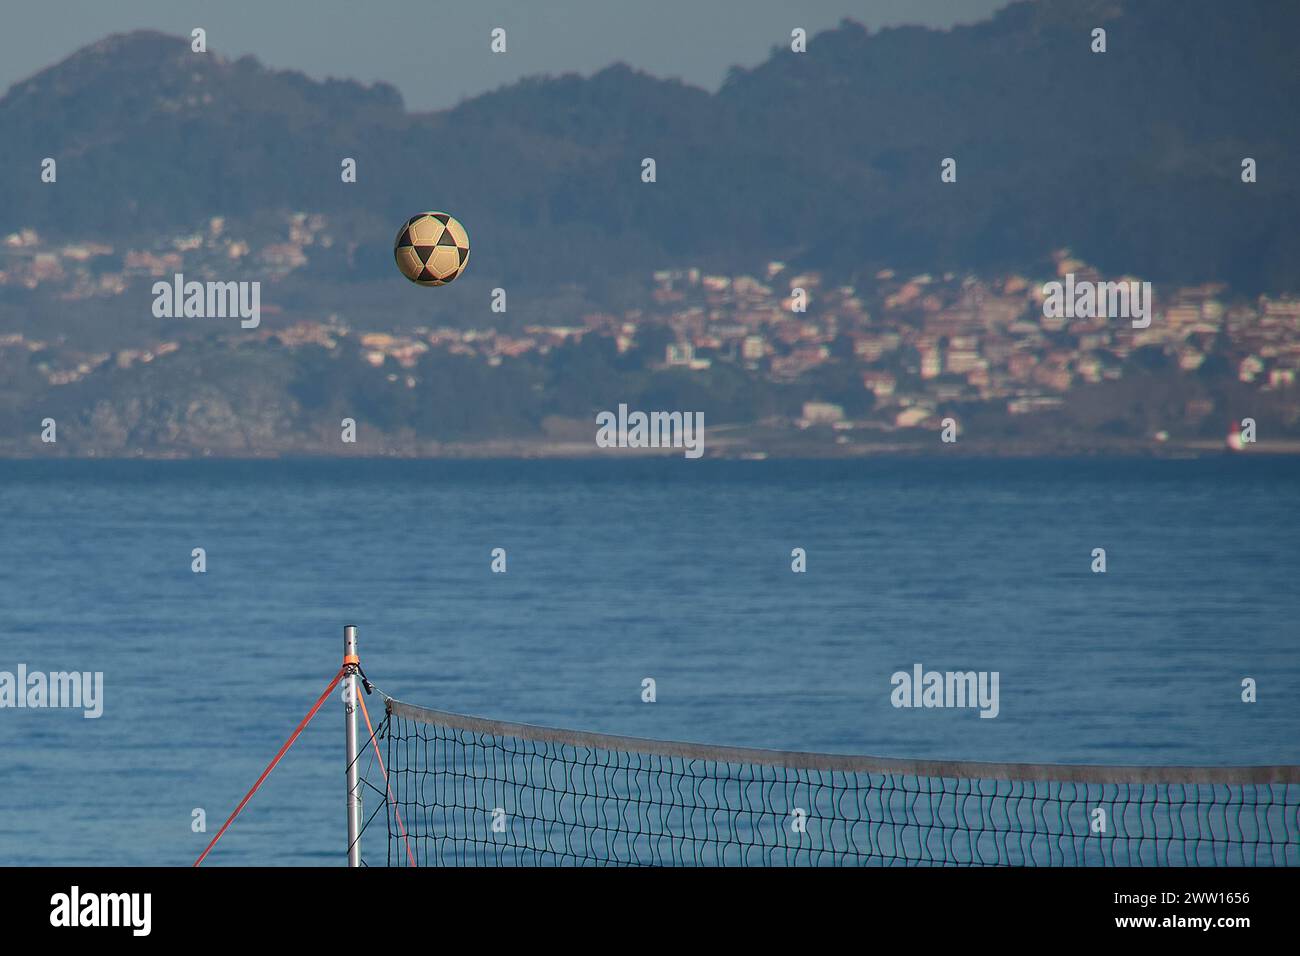 A beach volleyball rises under the net on the Vao de Vigo beach with the Estuary and the Morrazo peninsula in the background Stock Photo